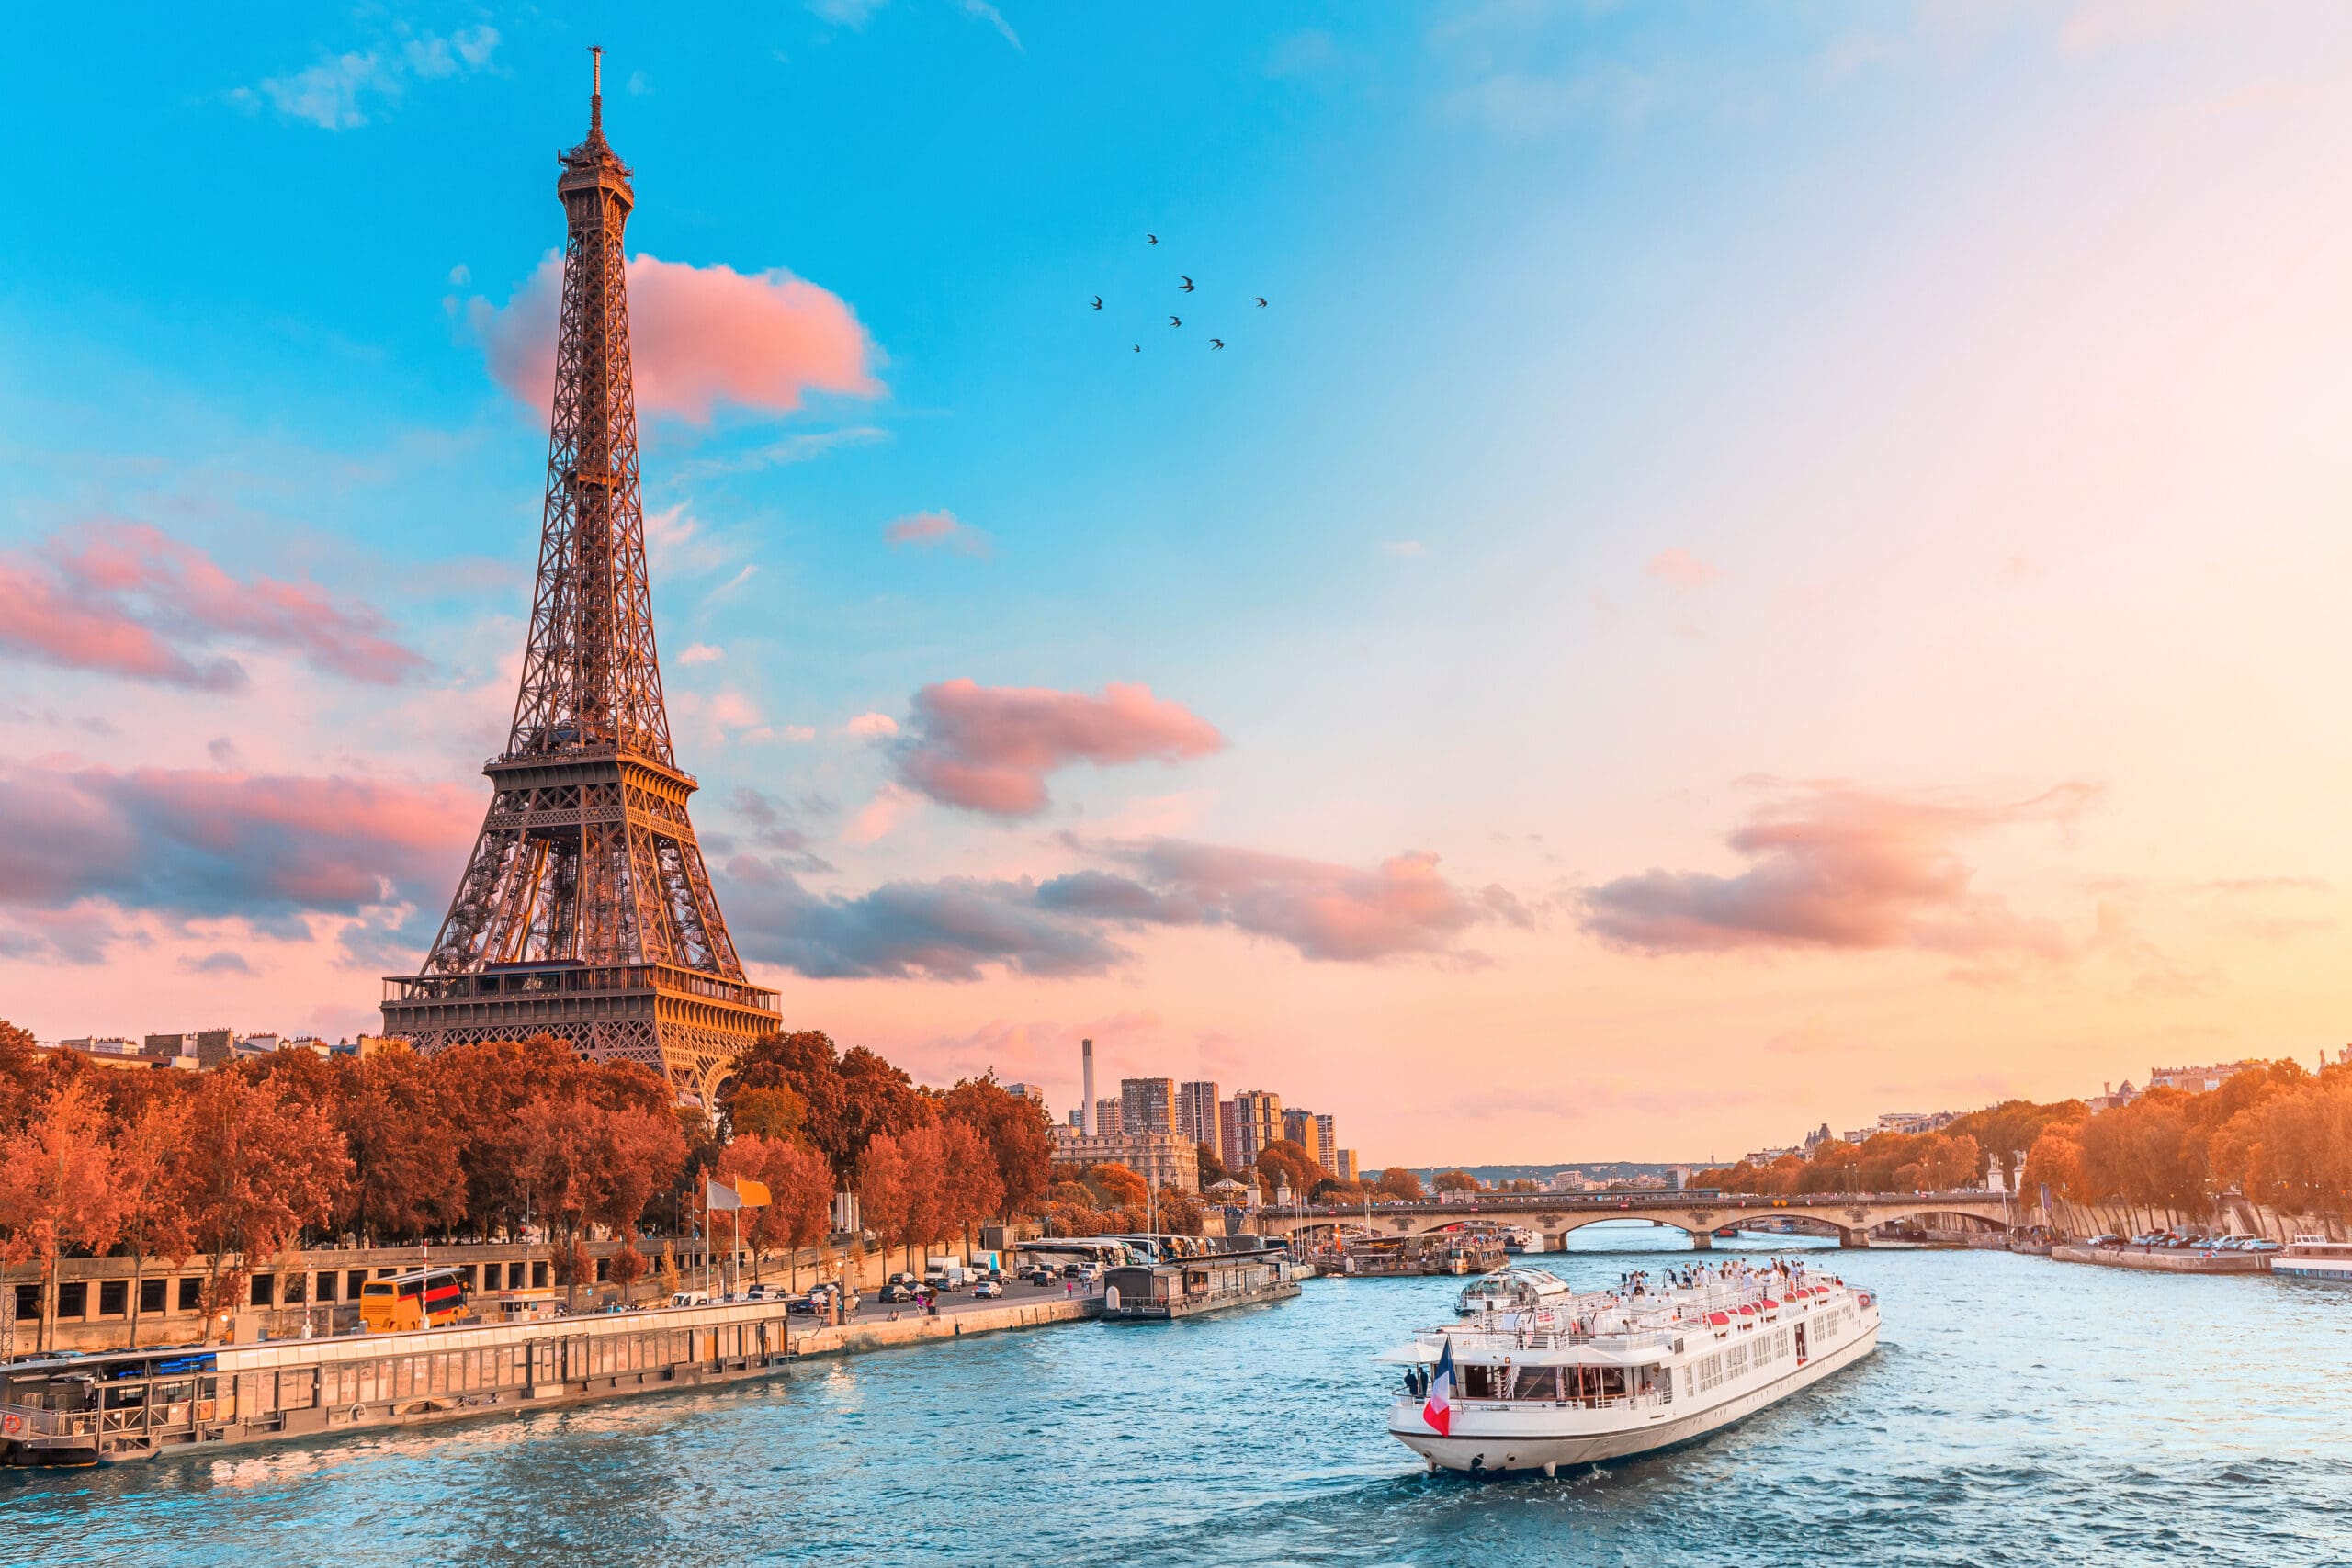 The main attraction of Paris and all of Europe is the Eiffel tower in the rays of the setting sun on the bank of Seine river with cruise tourist ships, France